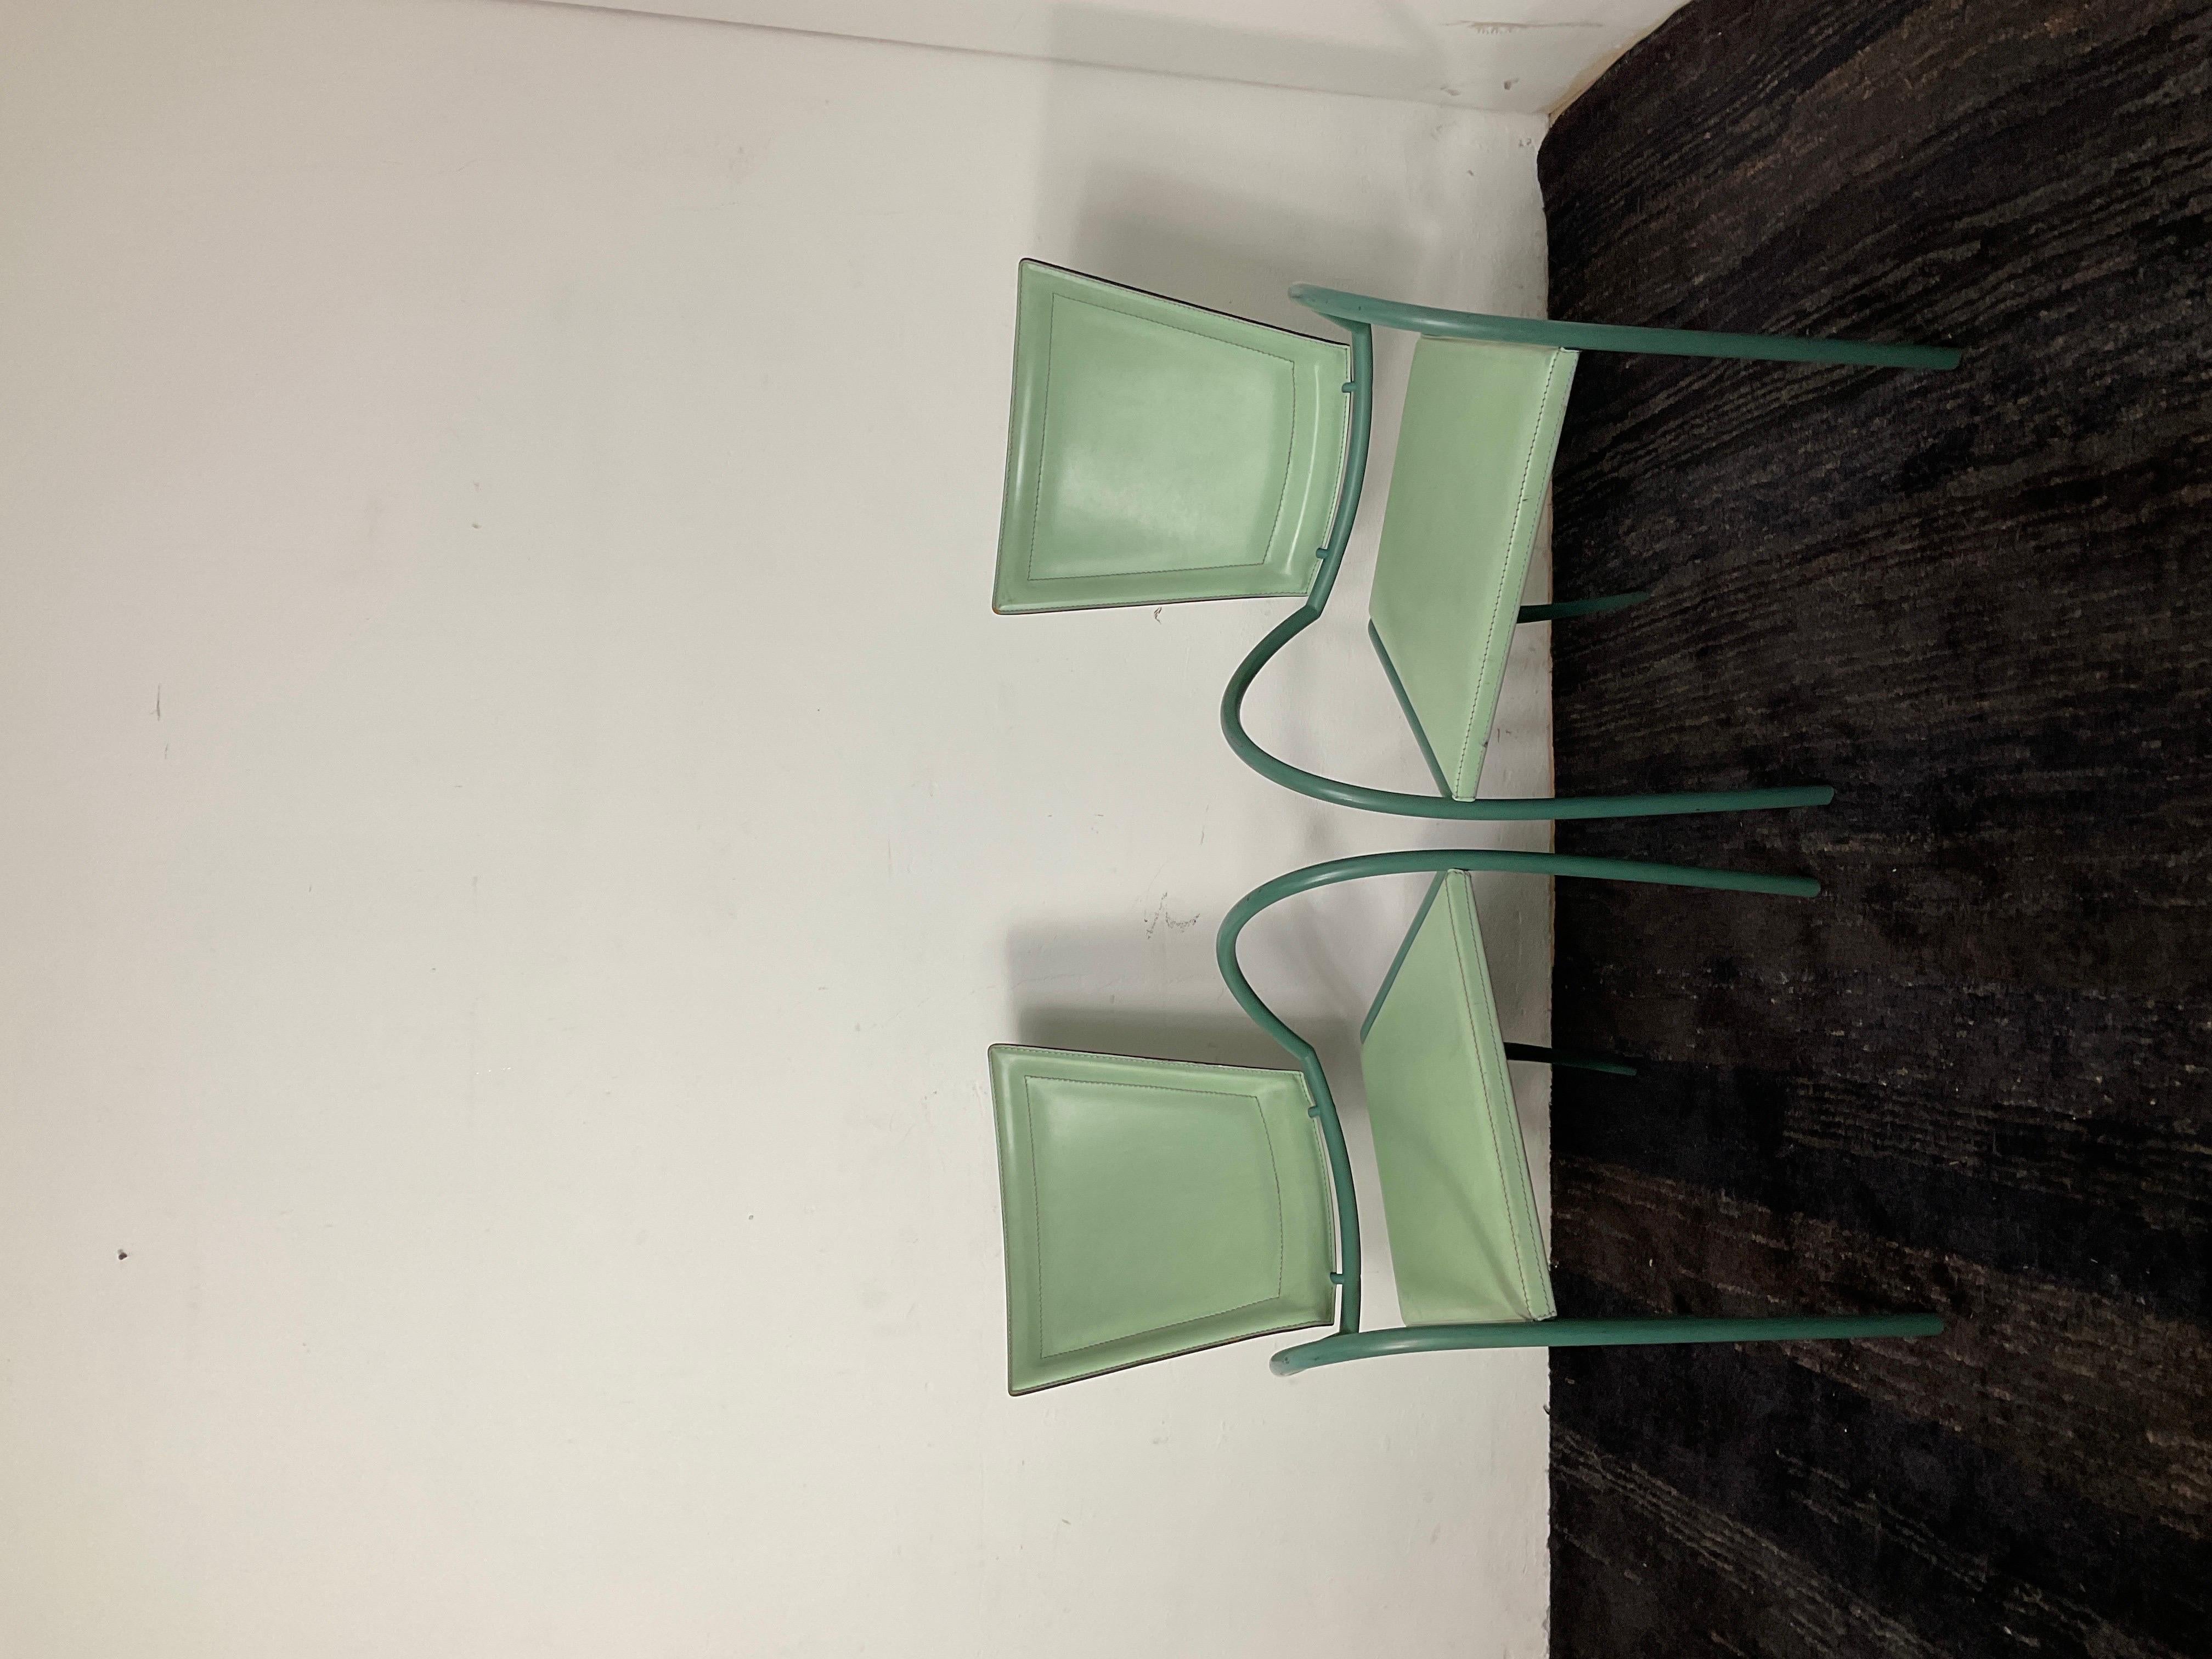 
Stunning pair of Italian iron and leather chairs by Sawaya & Moroni, made in Milan. These Italian Jacques Adnet style side chairs are in a fabulous green iron and green stitched leather and retain their original labels. The curvature of the iron is